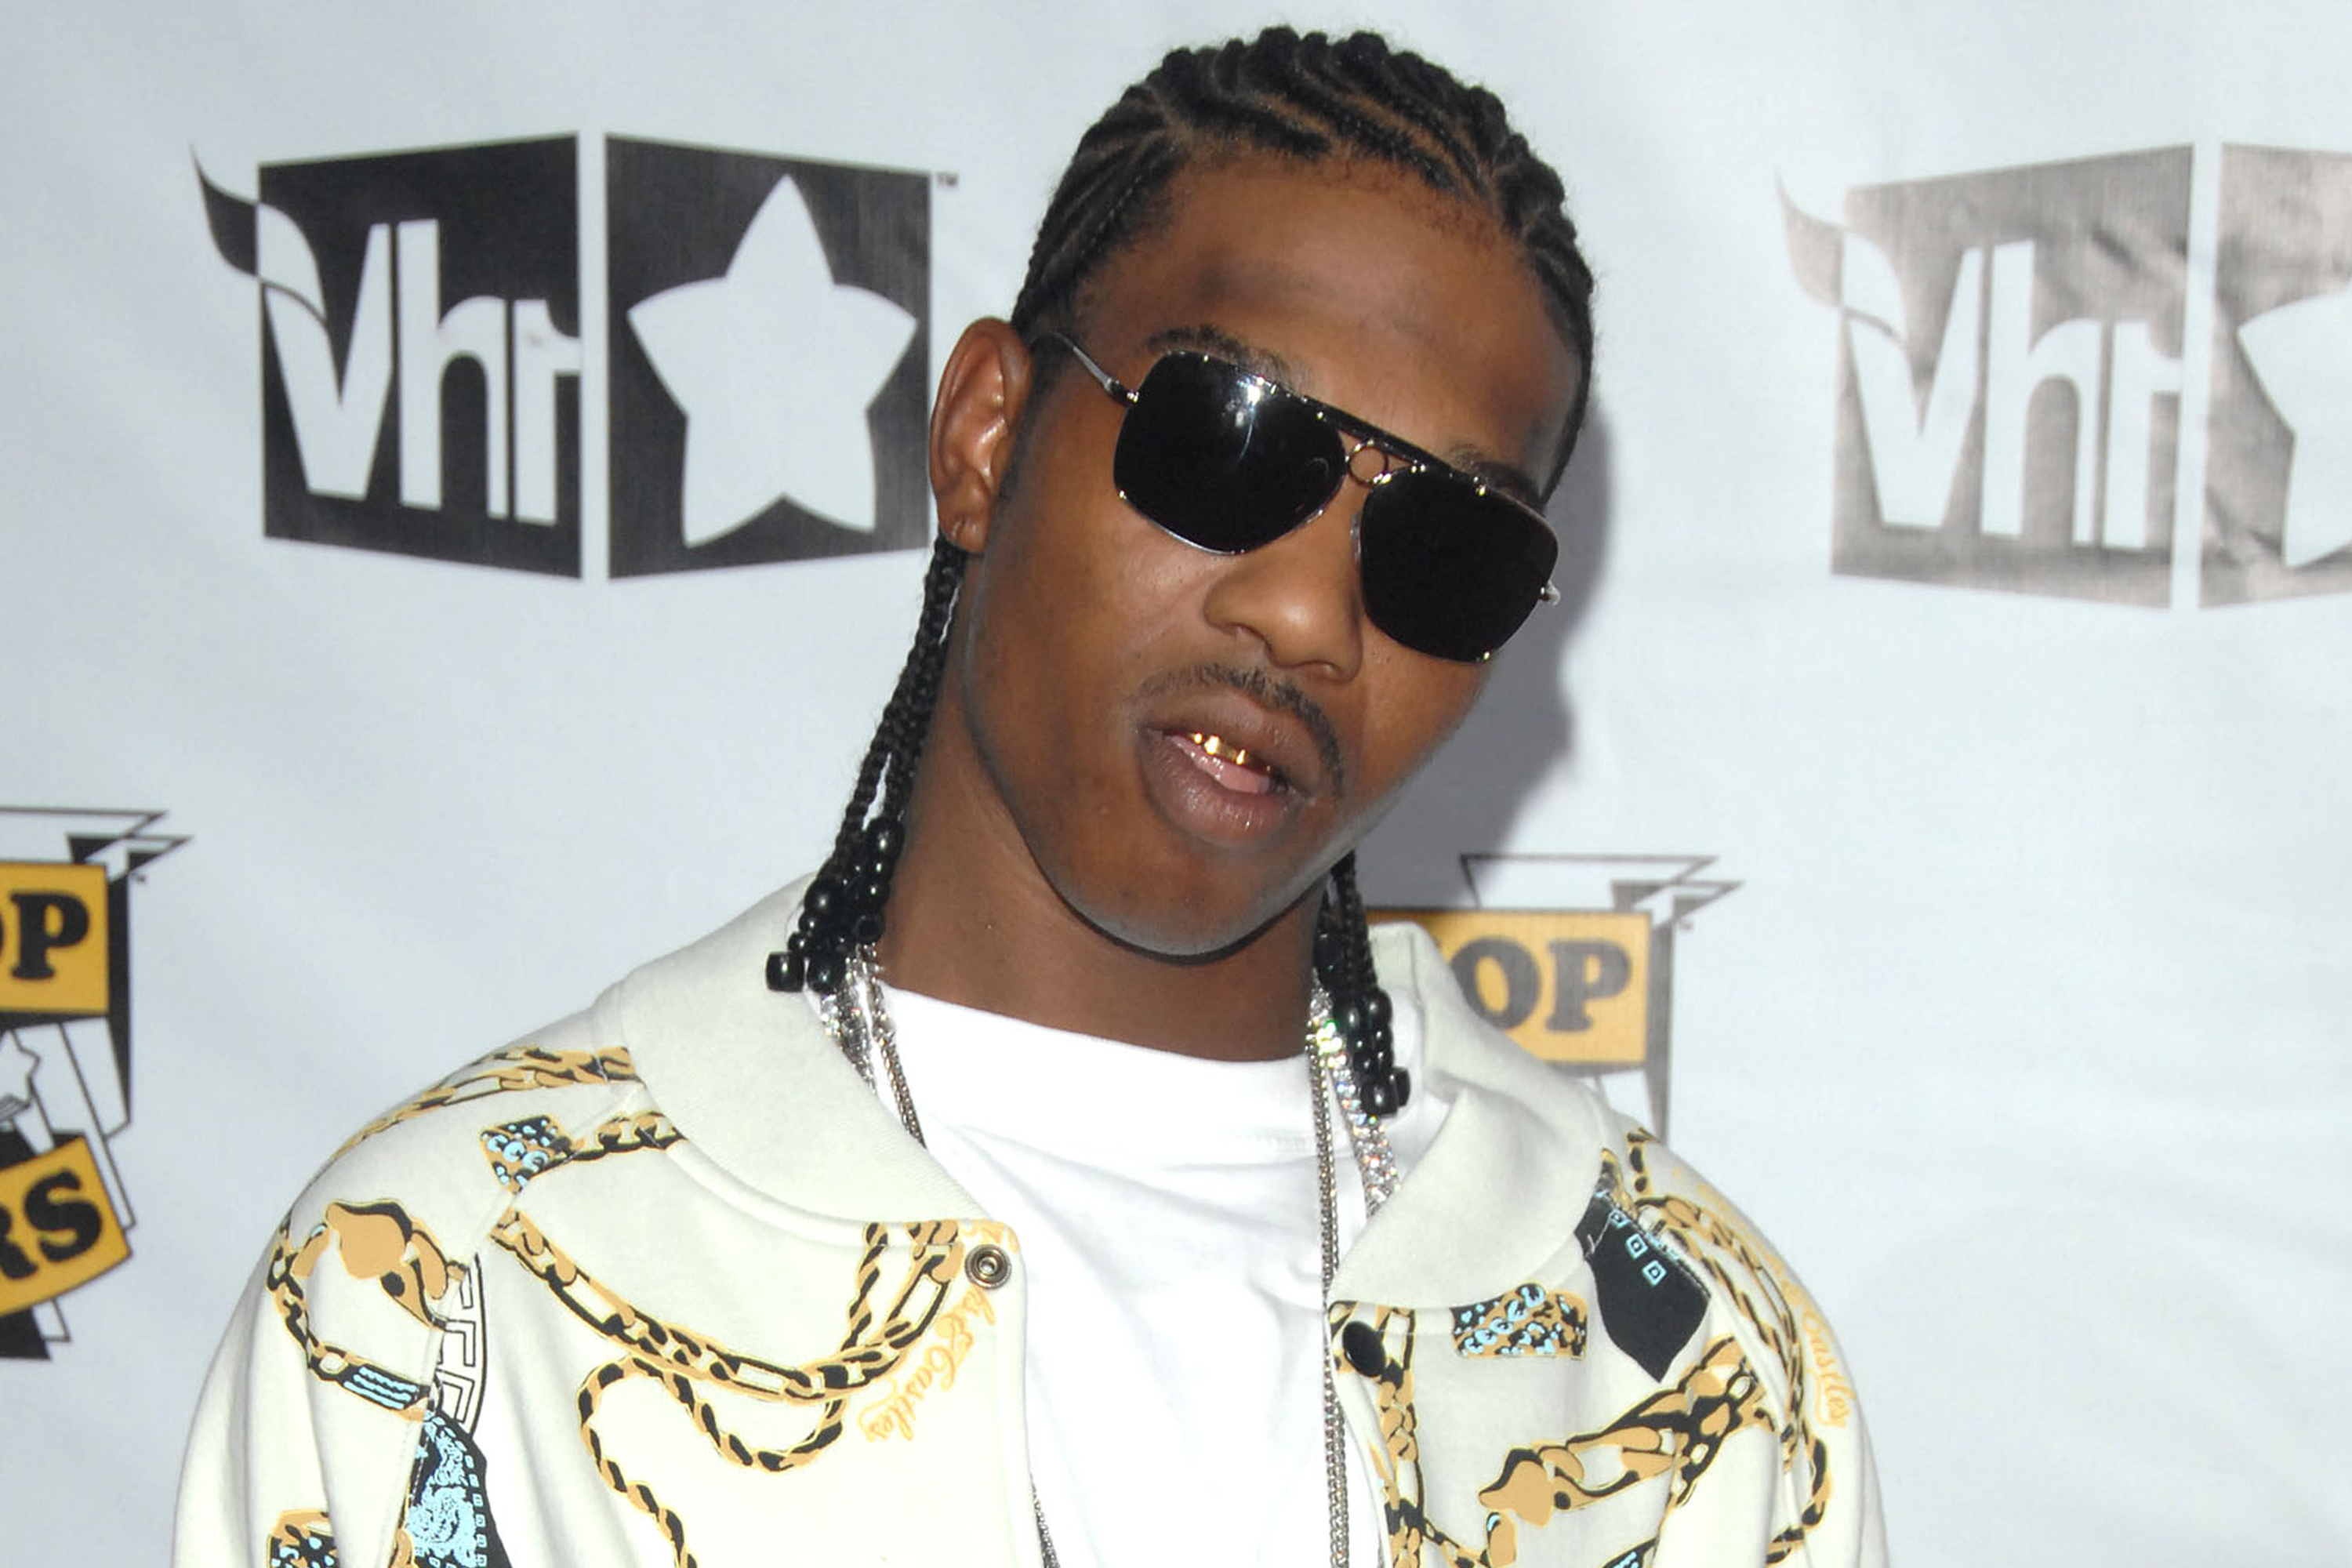 A man wearing cornrows, dark sunglasses, a gold grill, white T-shirt and cream jacket with yellow and blue designs